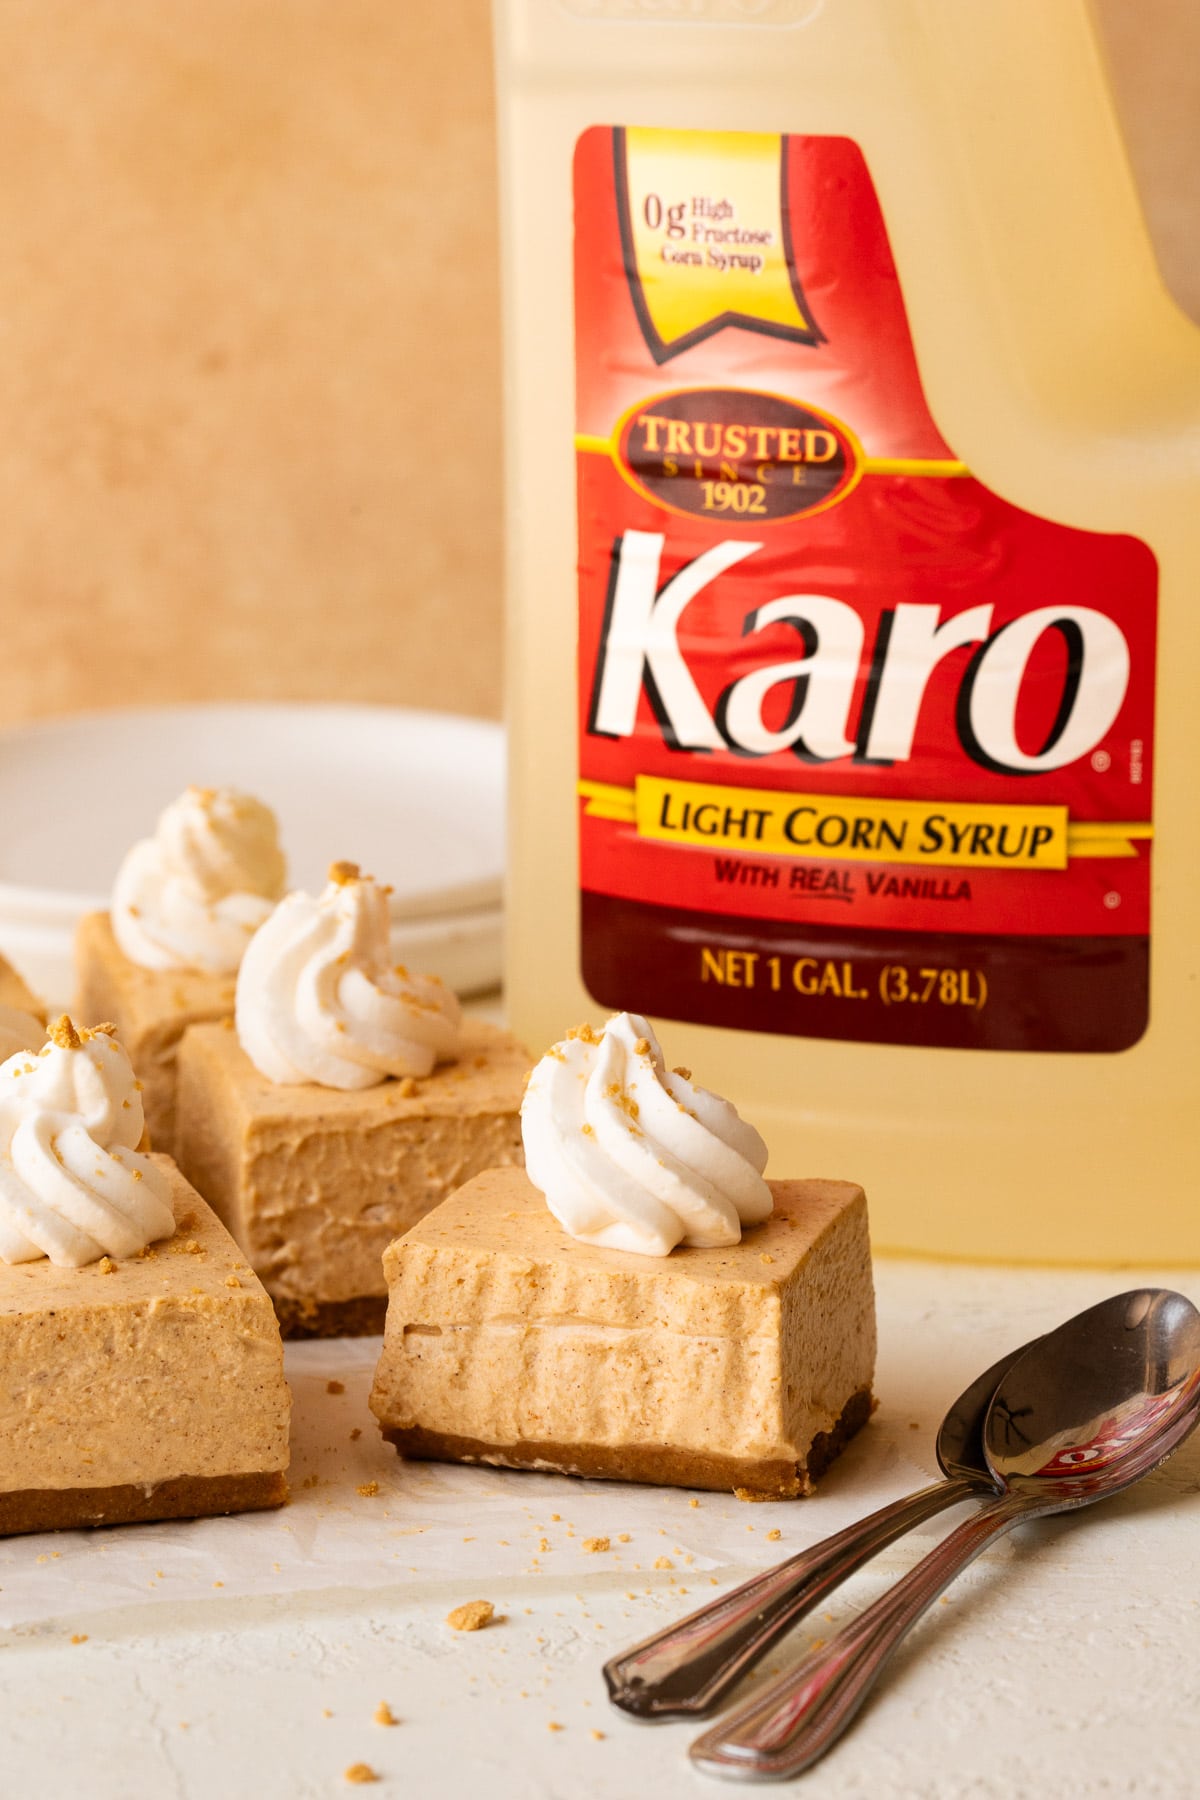 Pumpkin cheesecake bars sliced and topped with whipped cream in front of a bottle of Karo syrup.